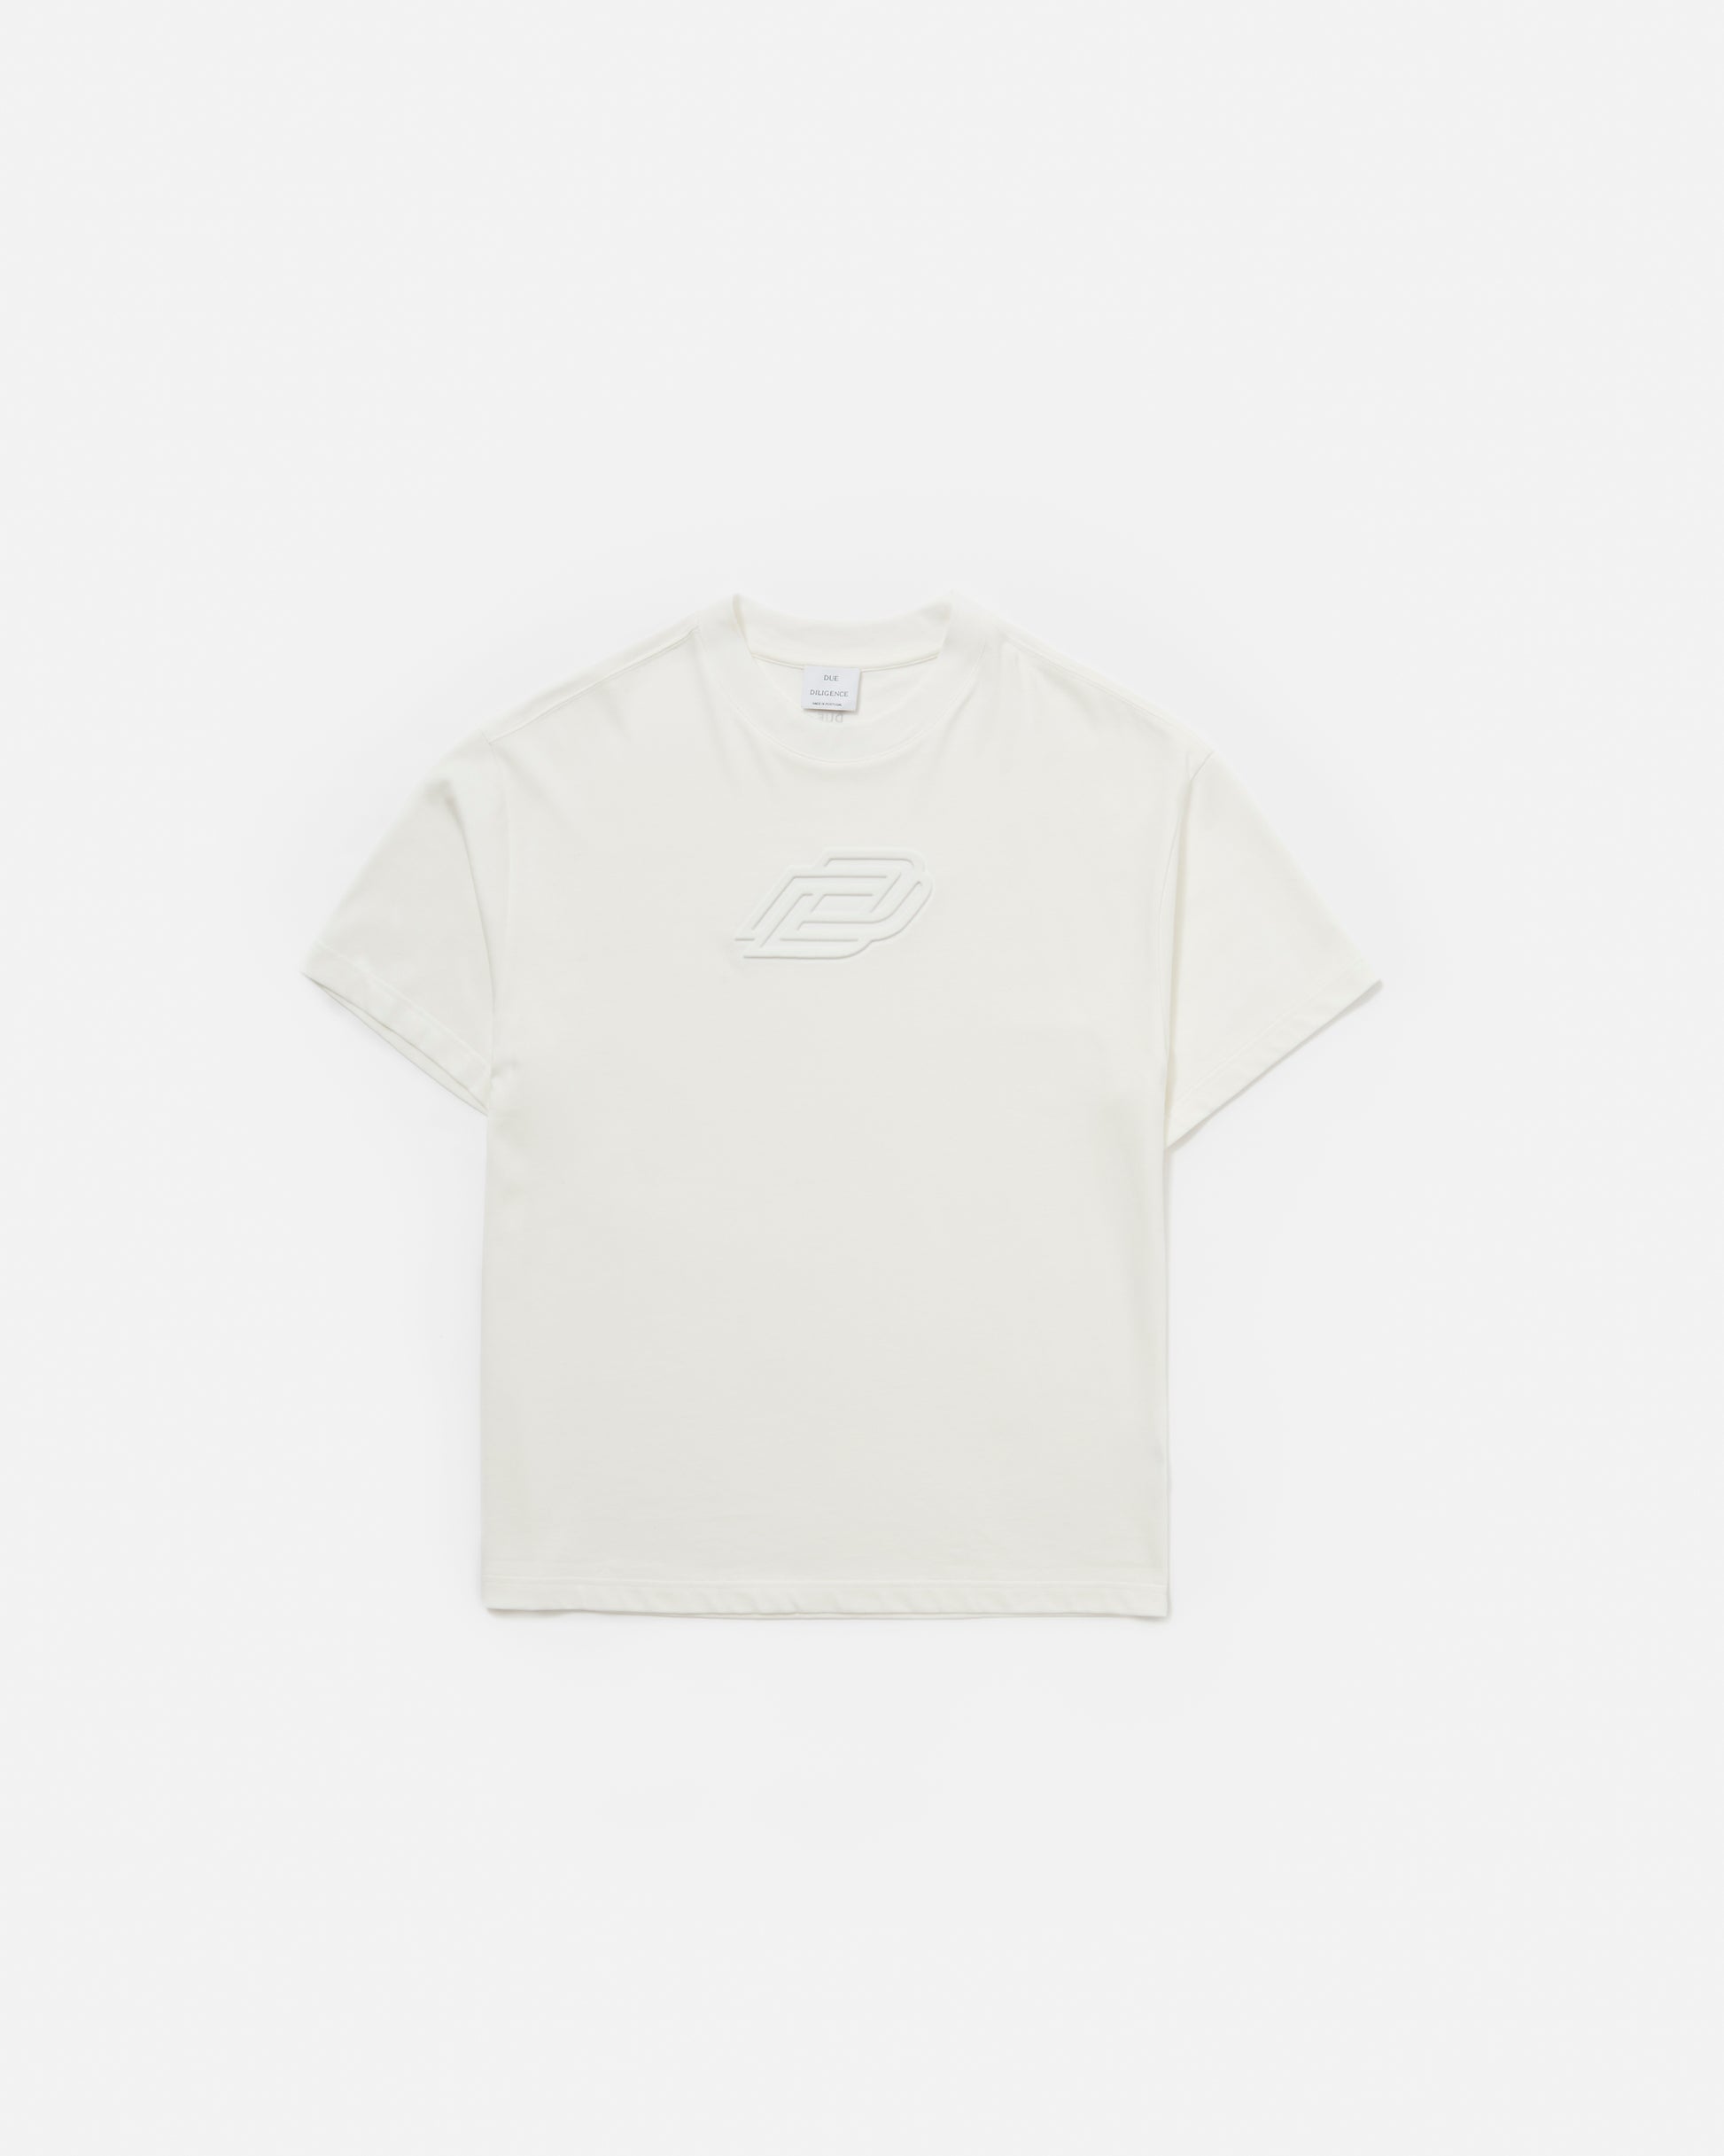 T-SHIRT WITH EMBOSSED DD LOGO - Due Diligence Apparel